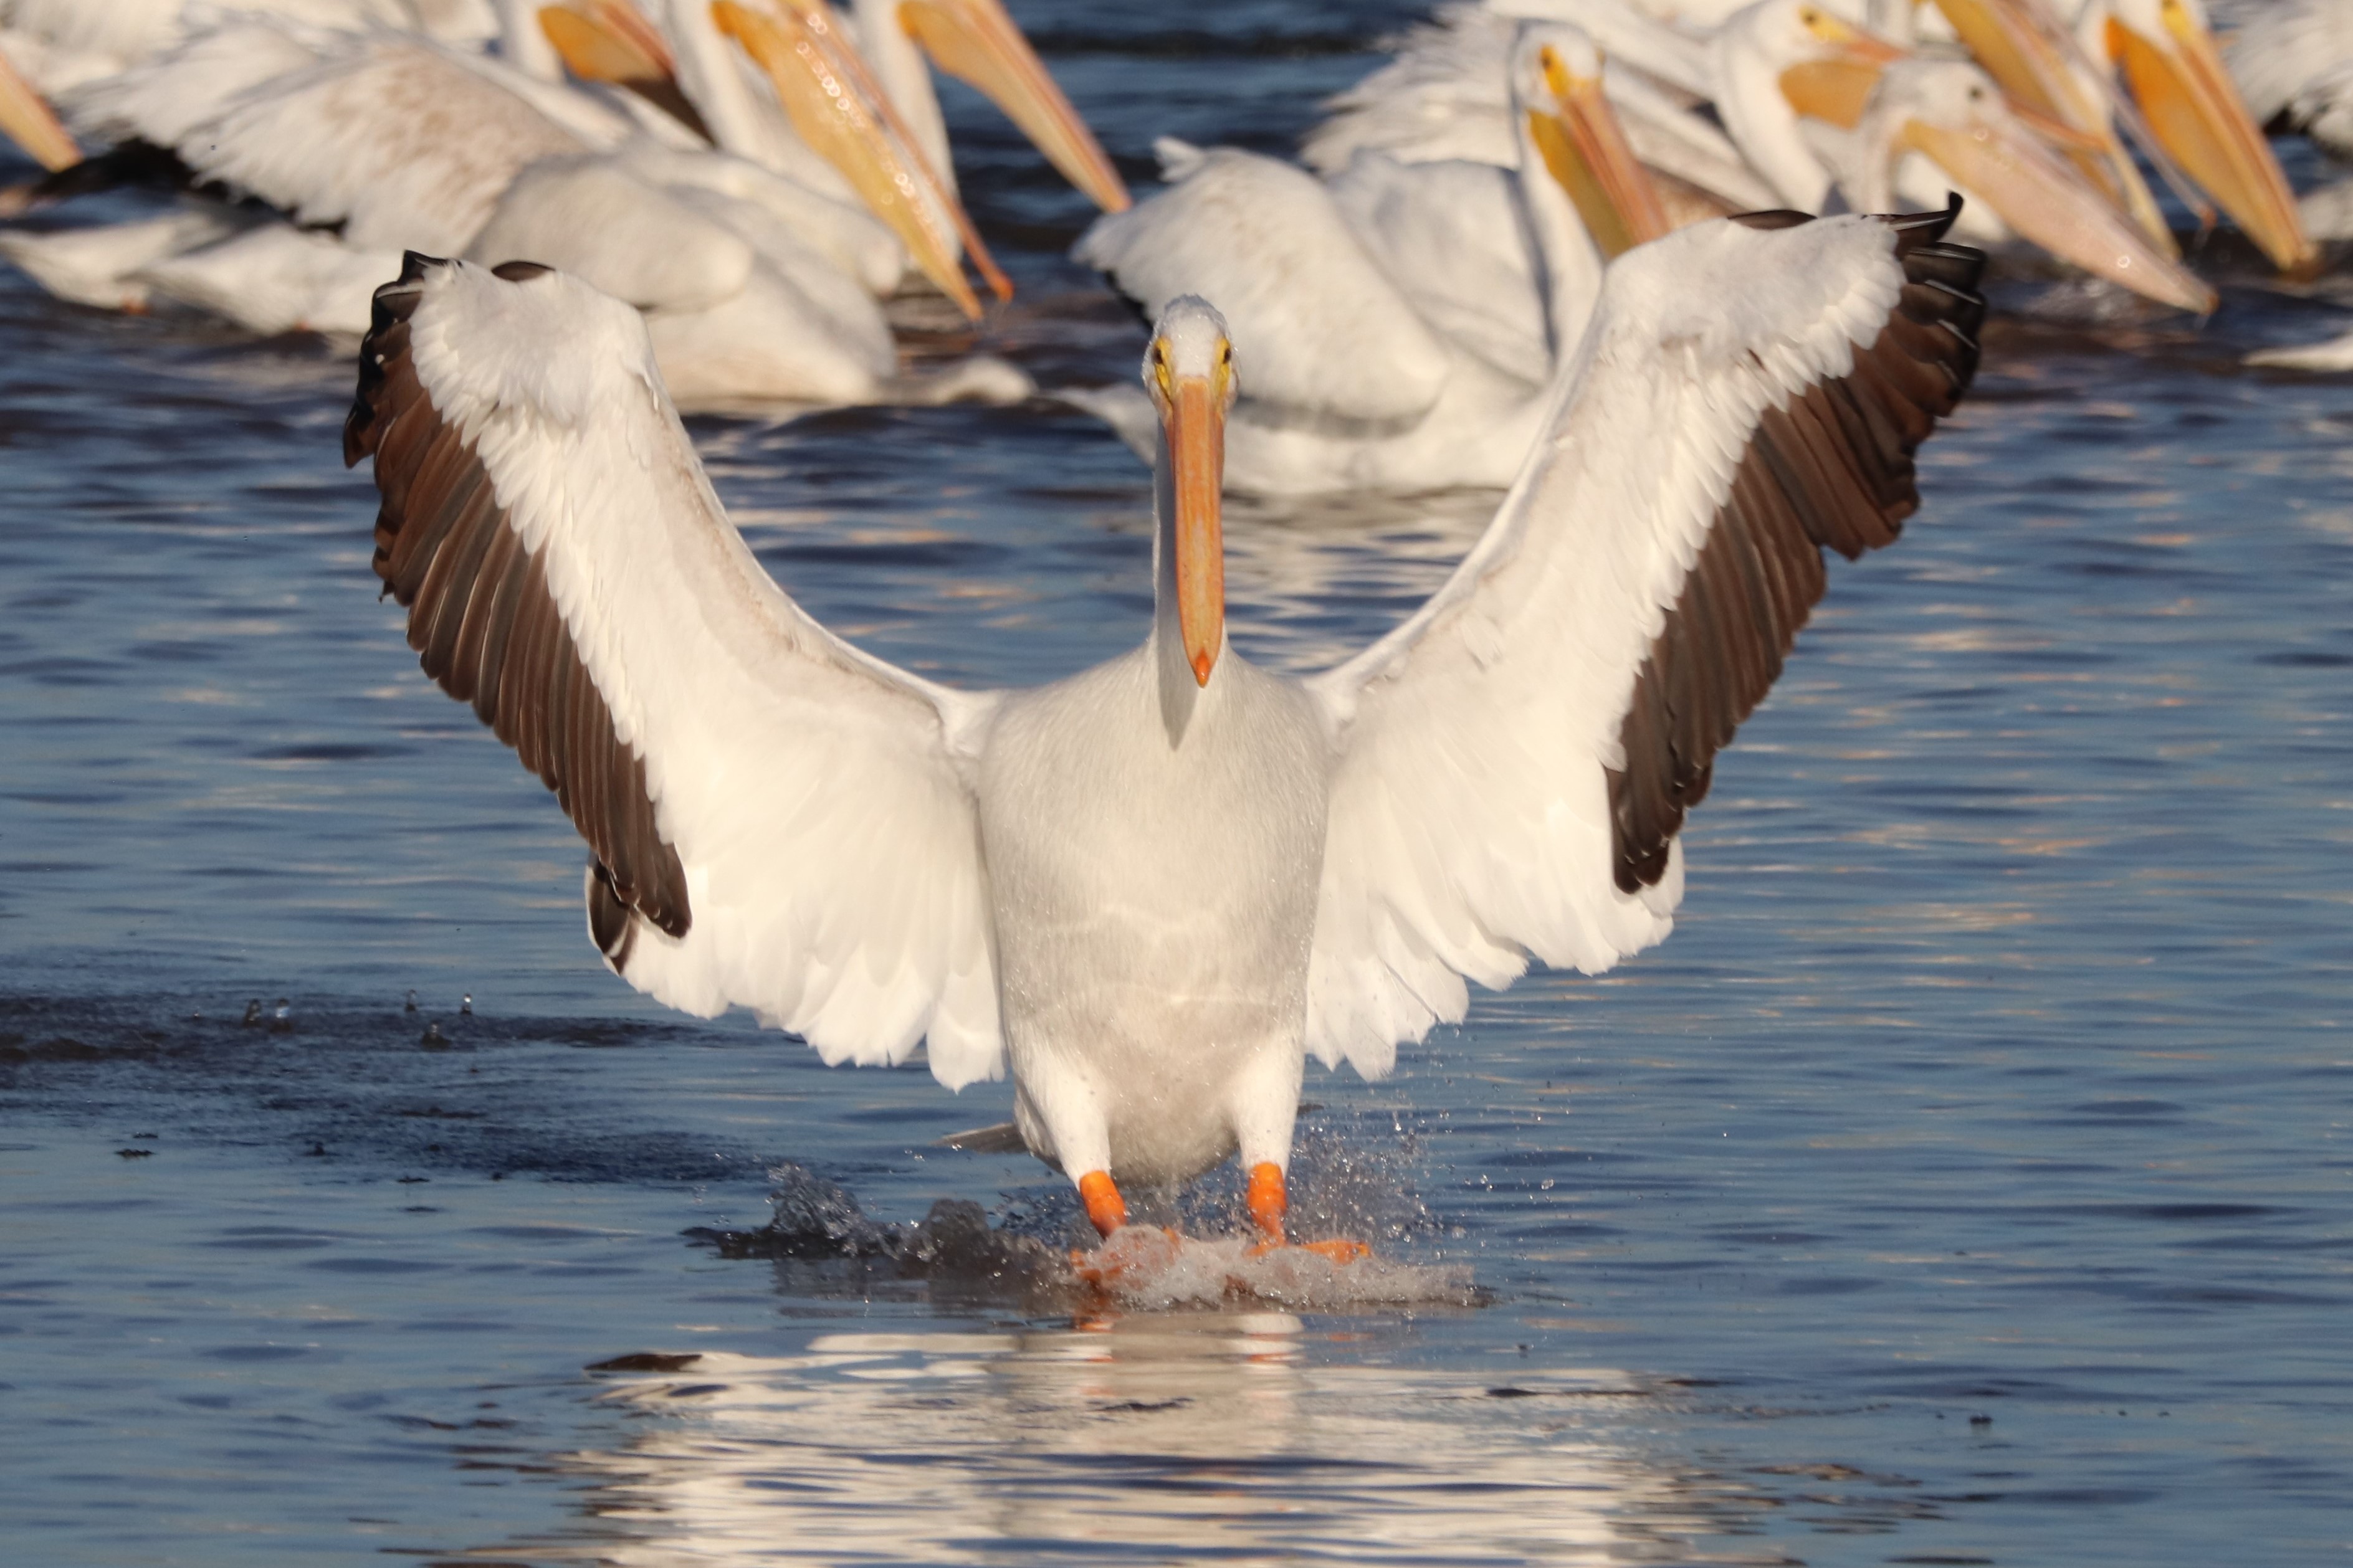 Photo by Buddy Walker  |  American White Pelican:  "Coming In For A Landing"